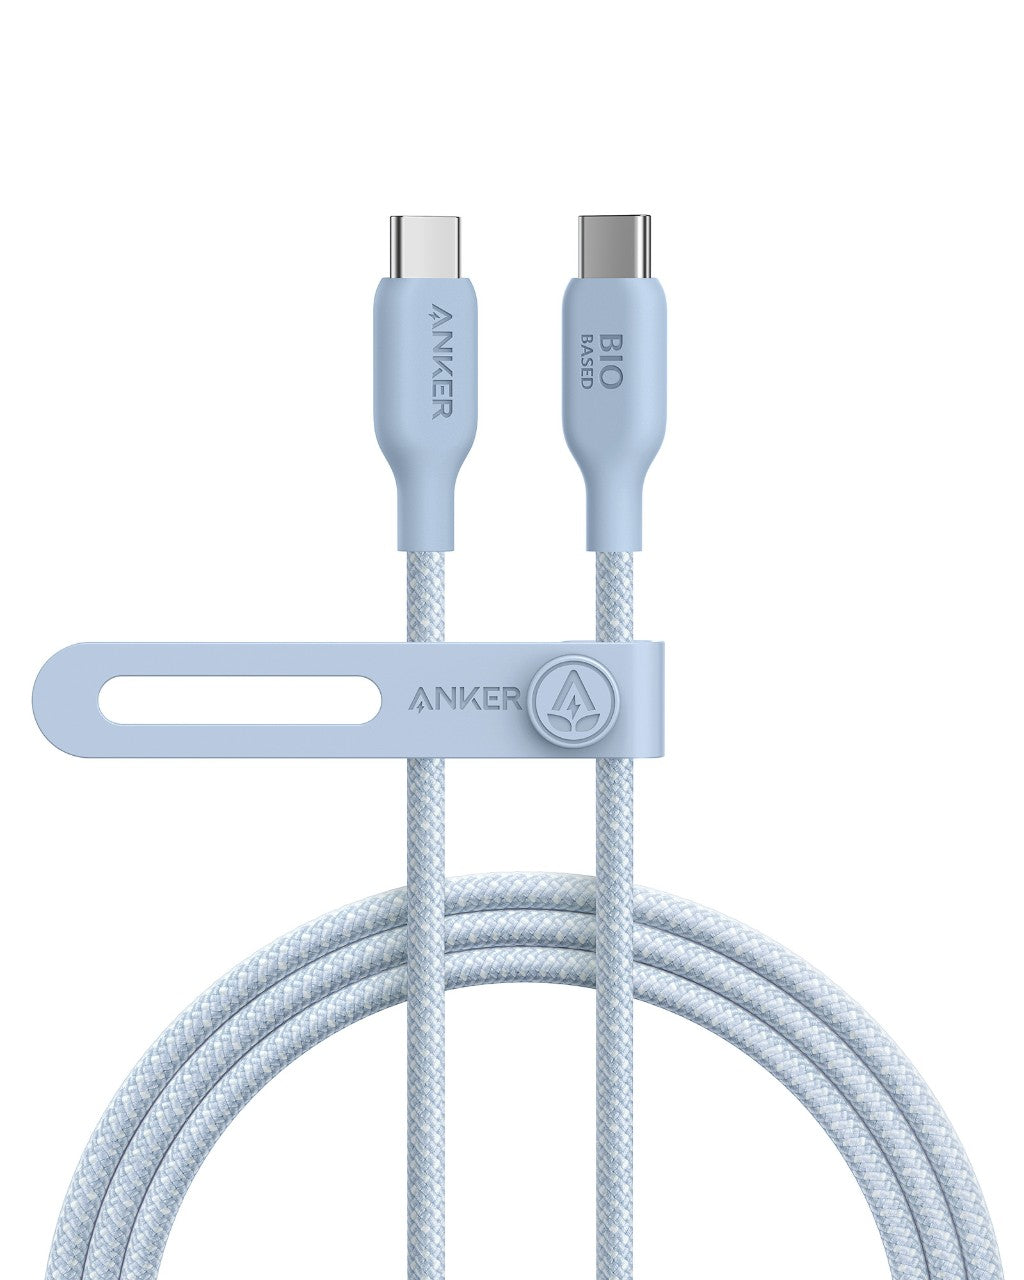 Anker USB-C to USB-C Cable (3ft / 6ft) 6ft / Ice Lake Blue